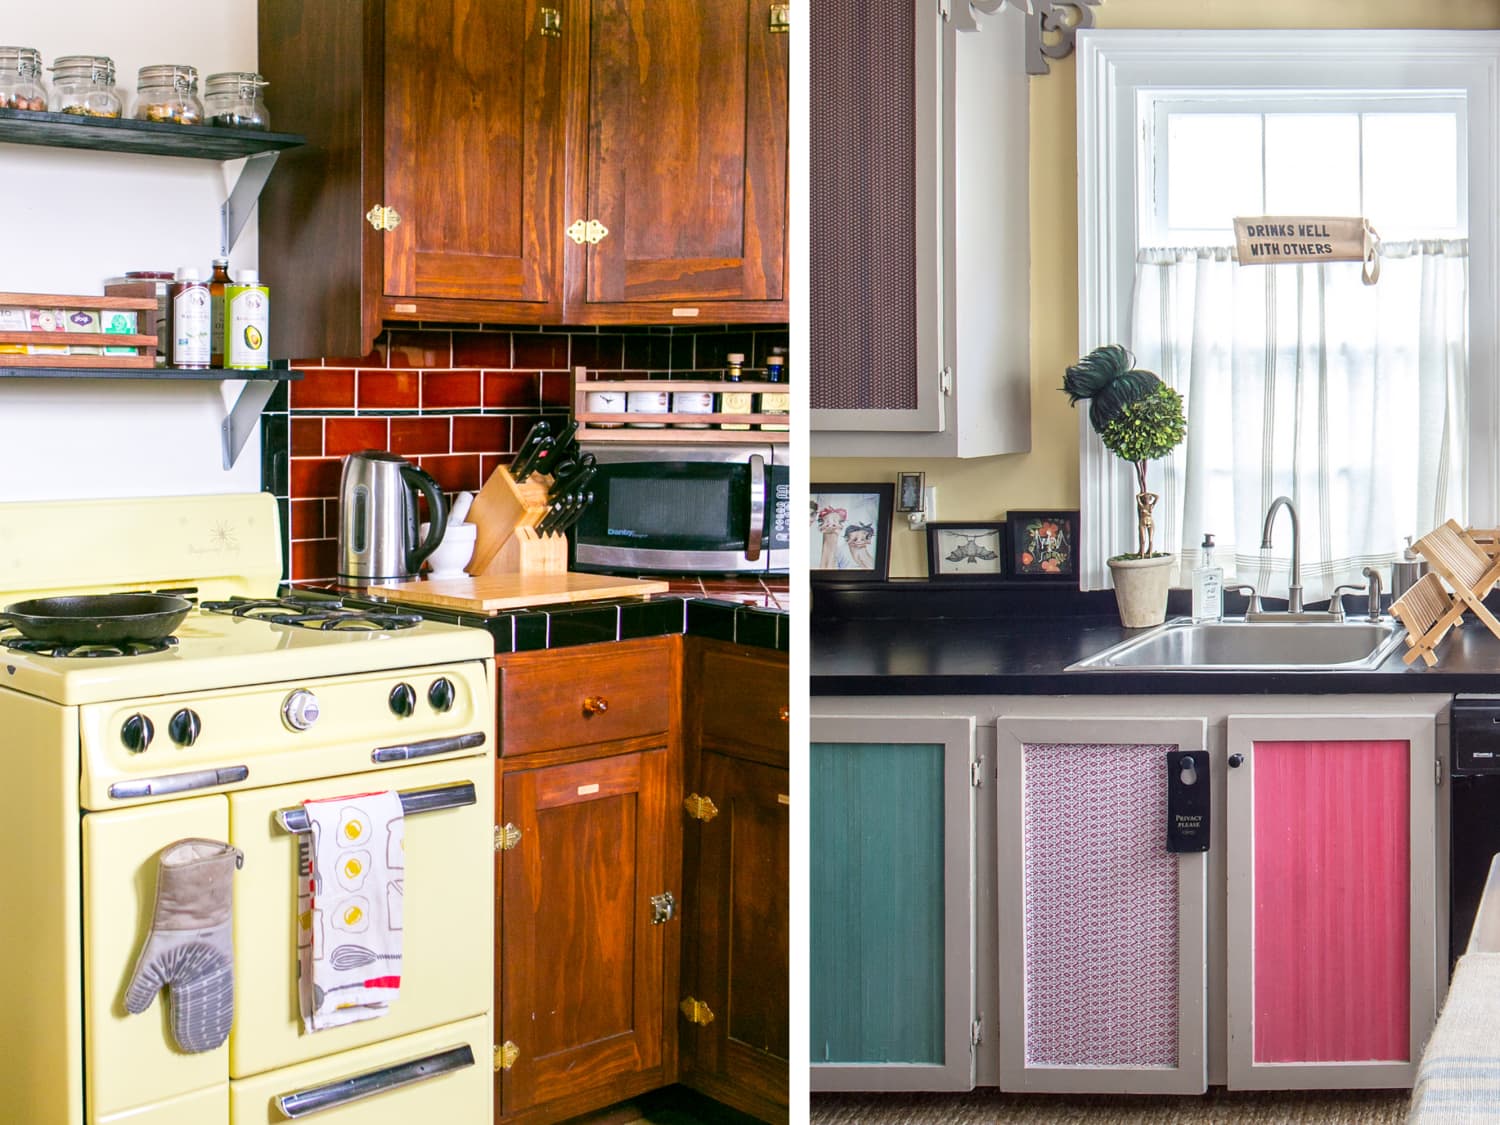 Kitchenette vs Kitchen: Which One Is for You? - RentCafe rental blog